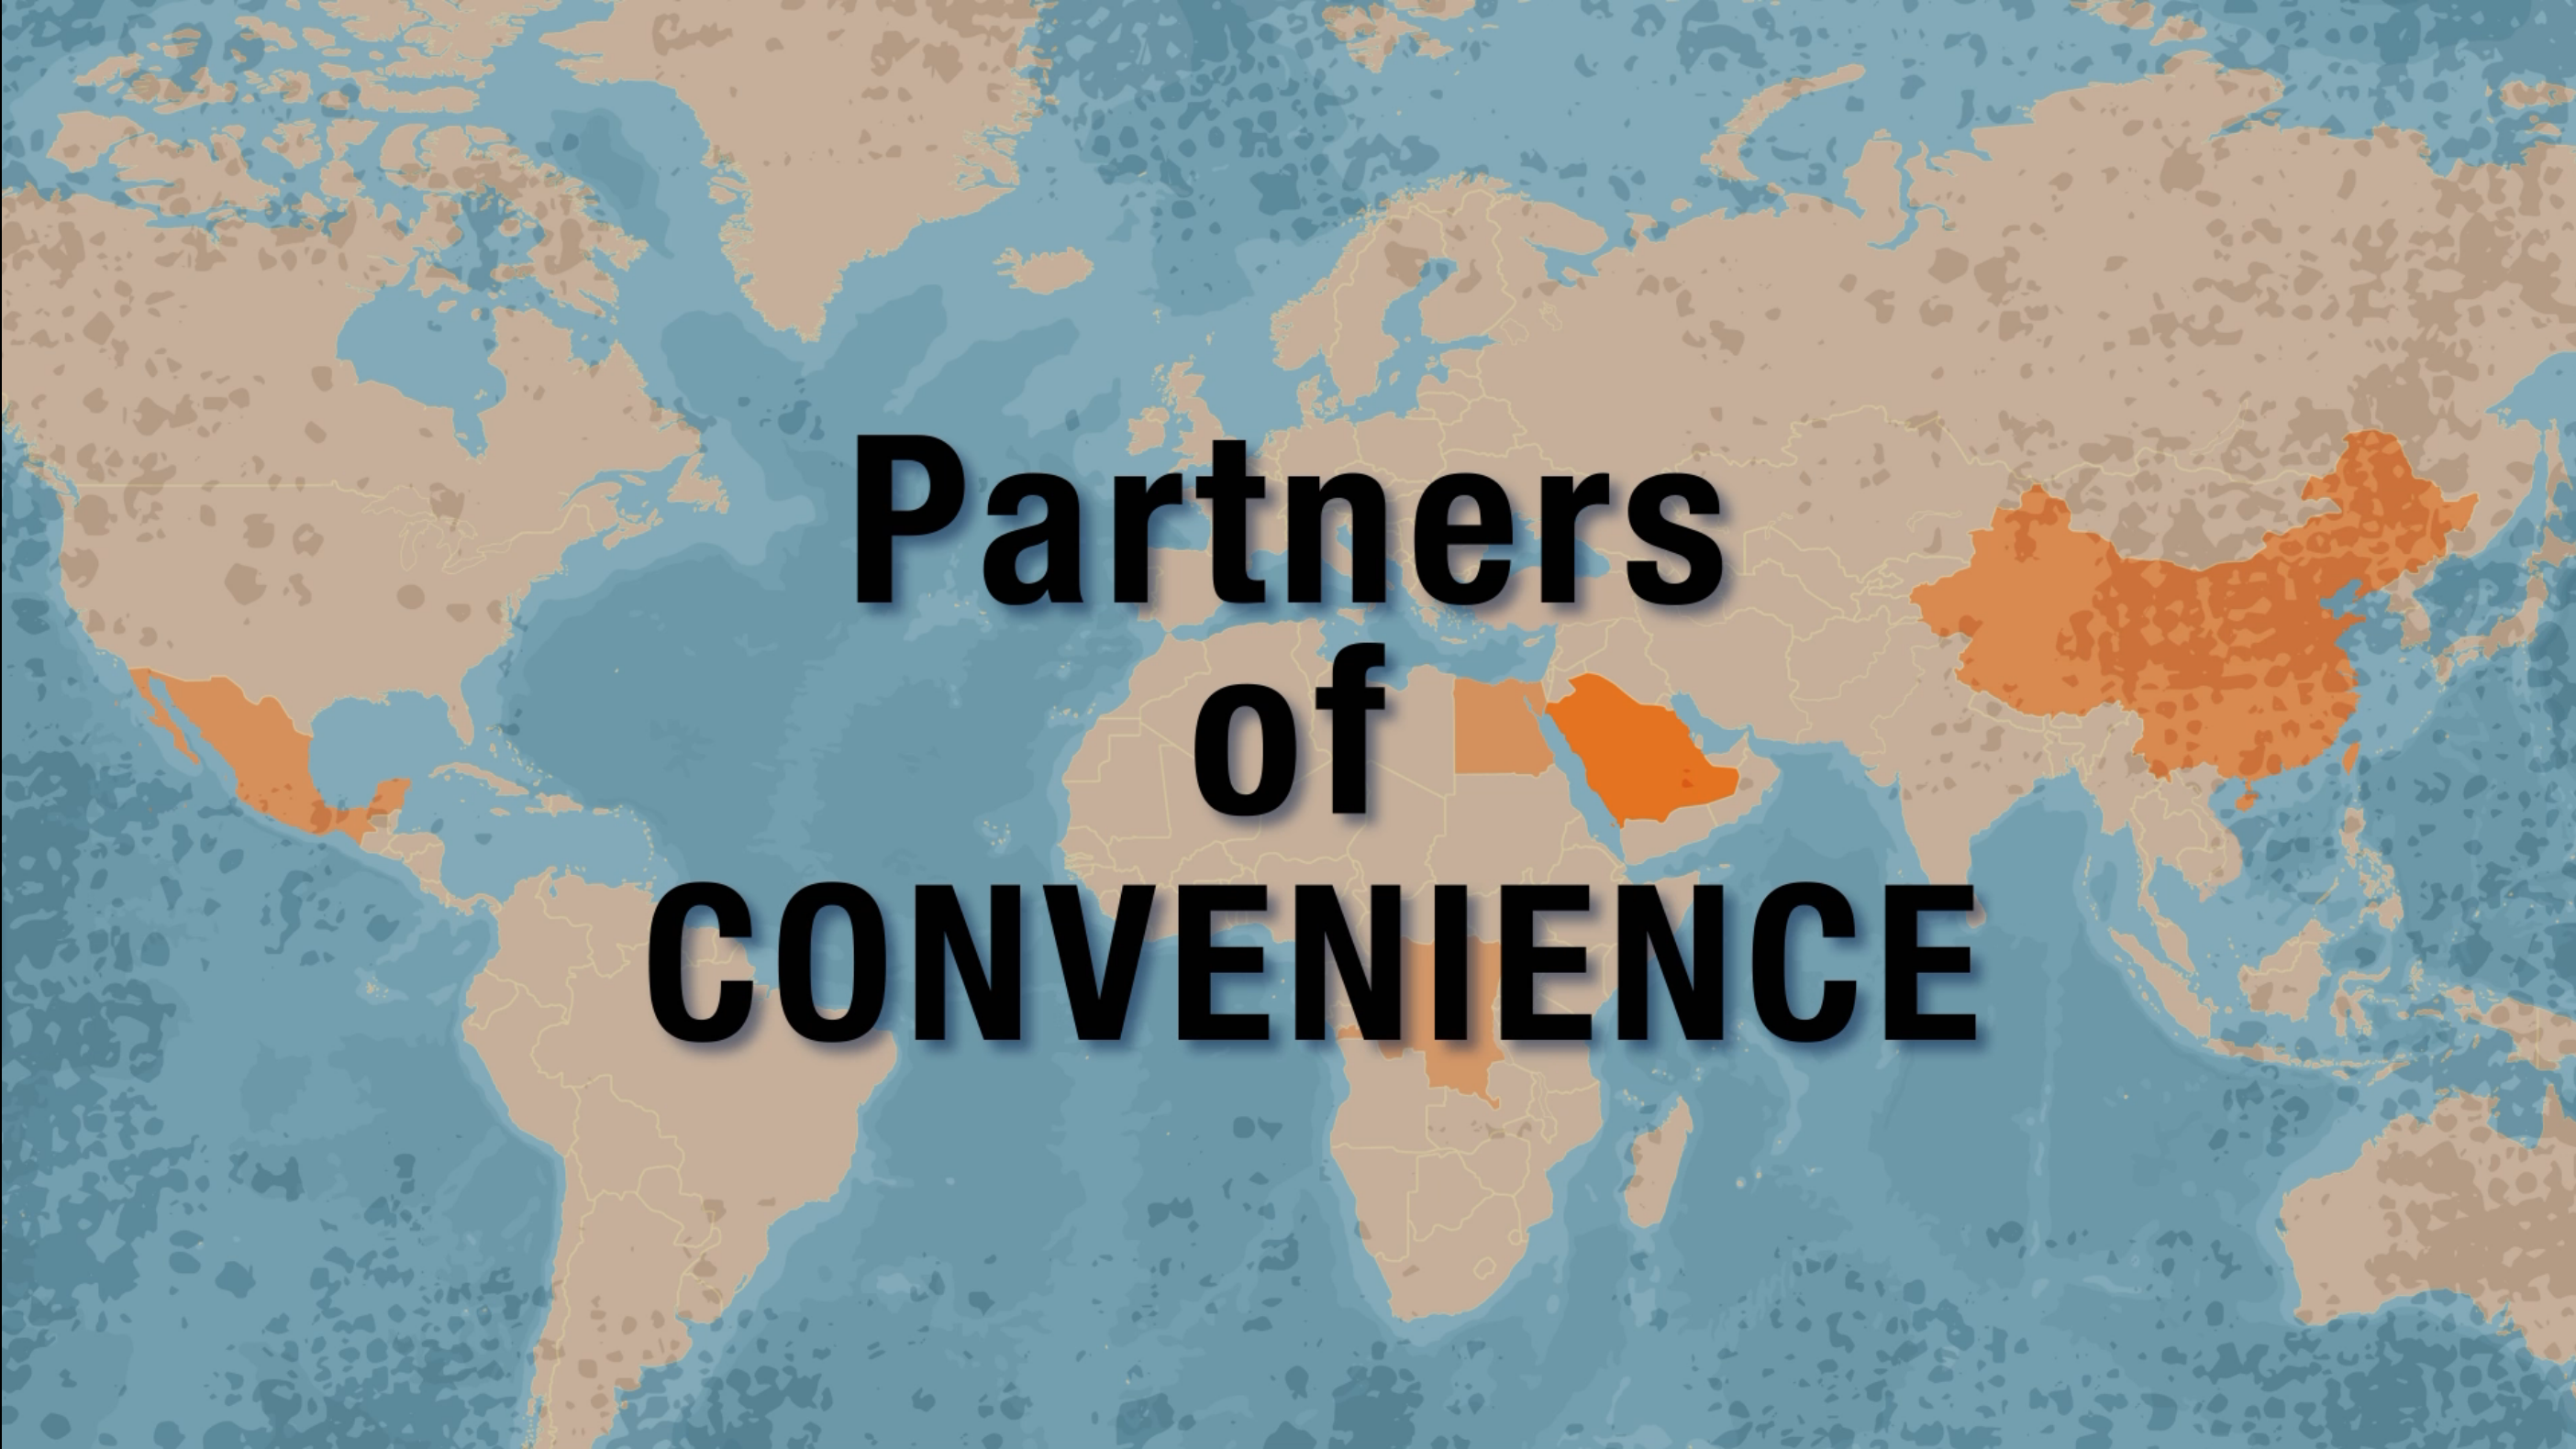 Partners of convenience